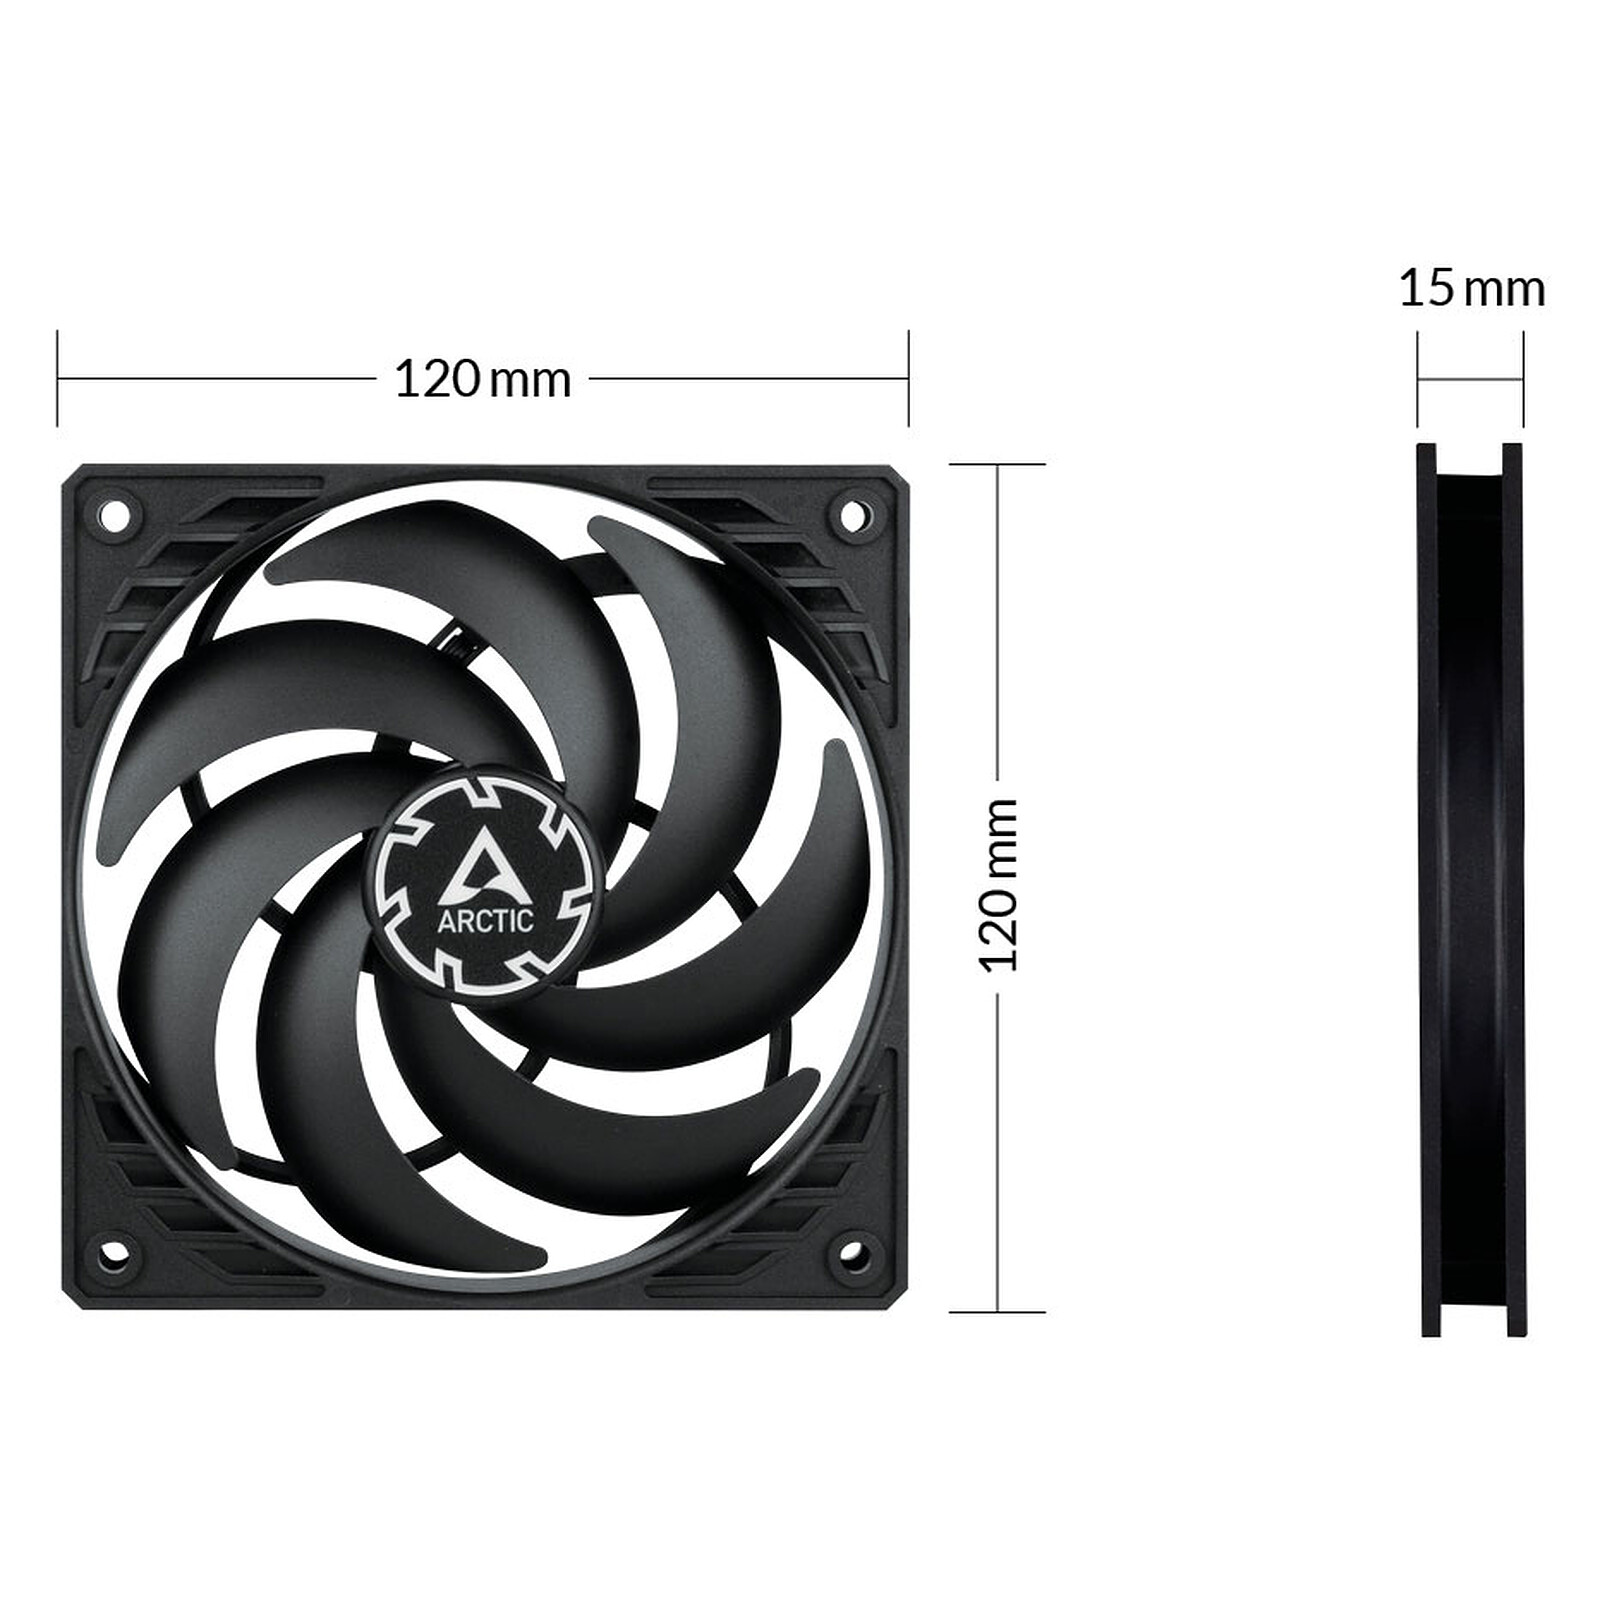 P12 PWM PST, 120 mm PWM Fan with Cable Splitter